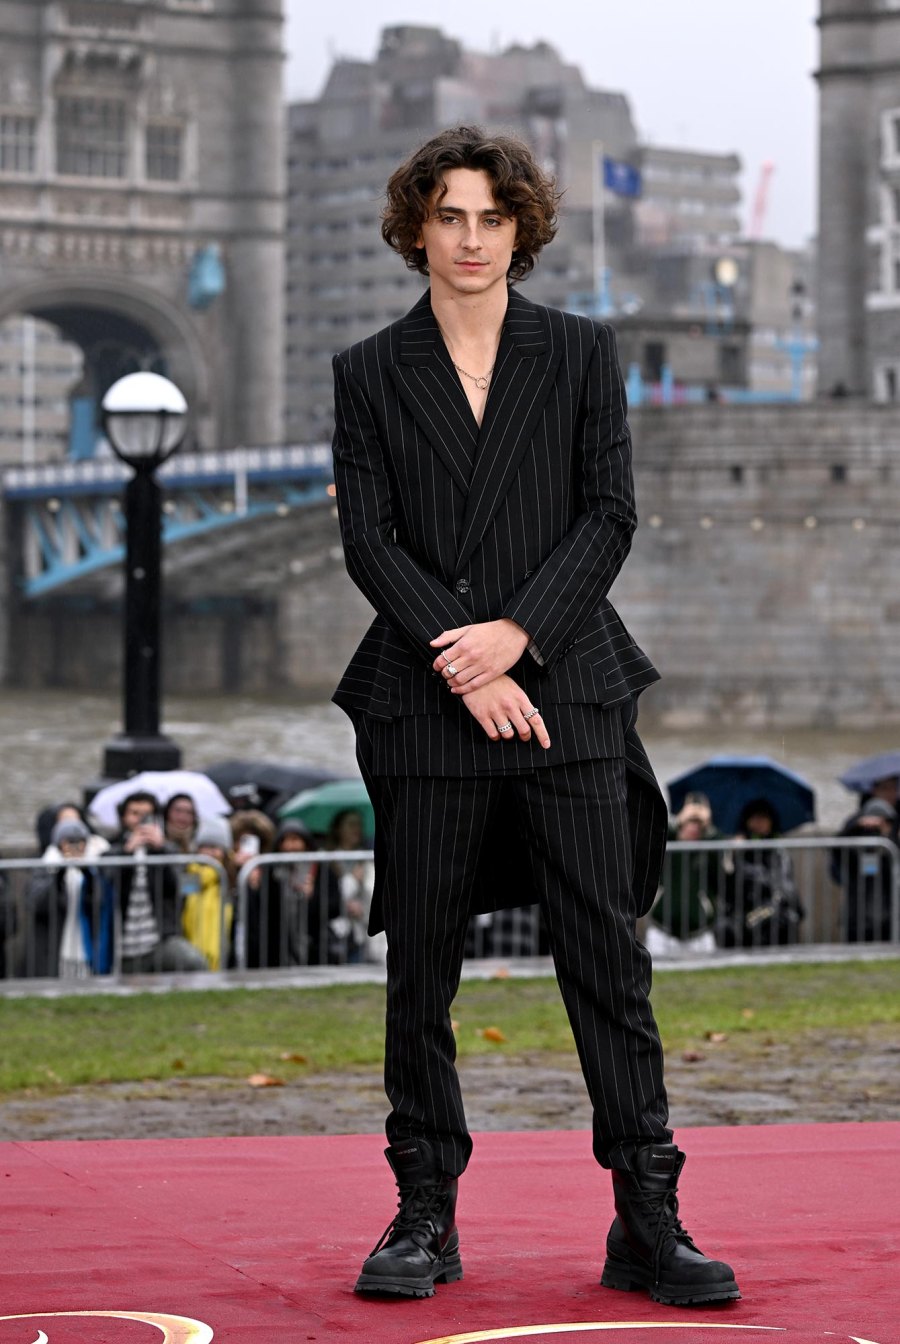 Timothee Chalamets Best Fashion Moments